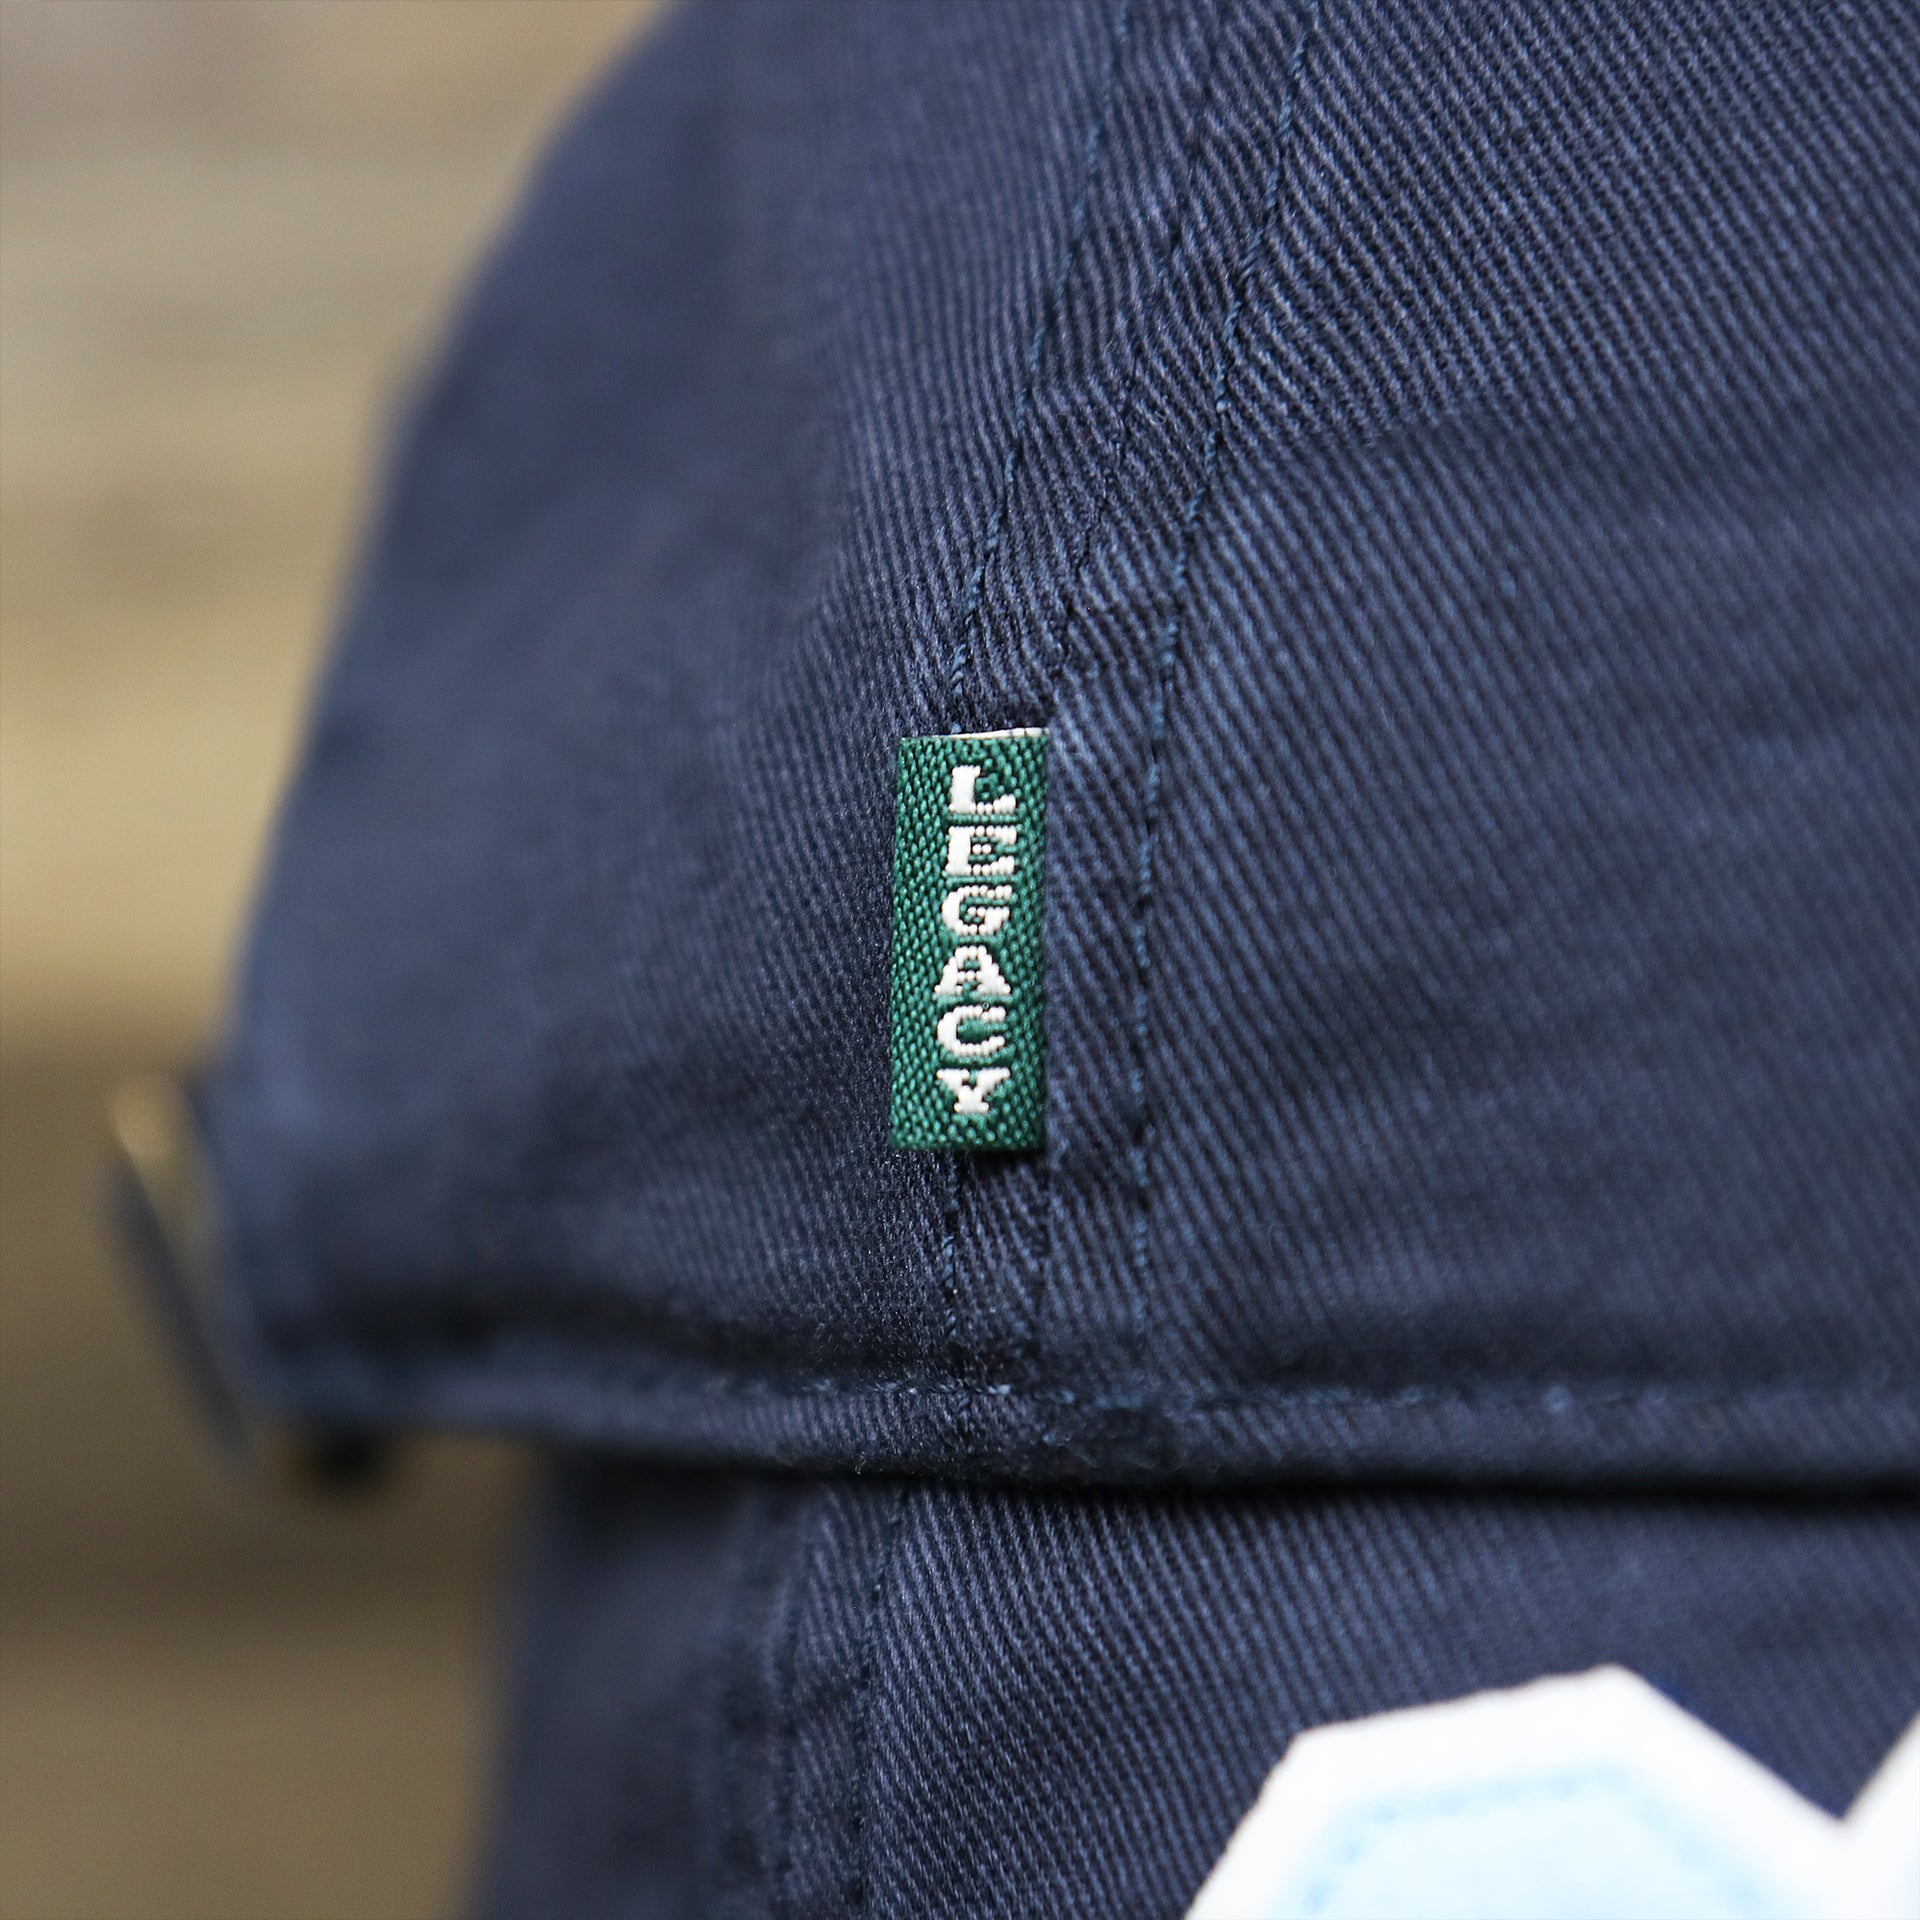 The Green Legacy Tag on the Youth Light Blue OCNJ Wordmark White Outline Dad Hat | Youth Navy Blue Dad Hat